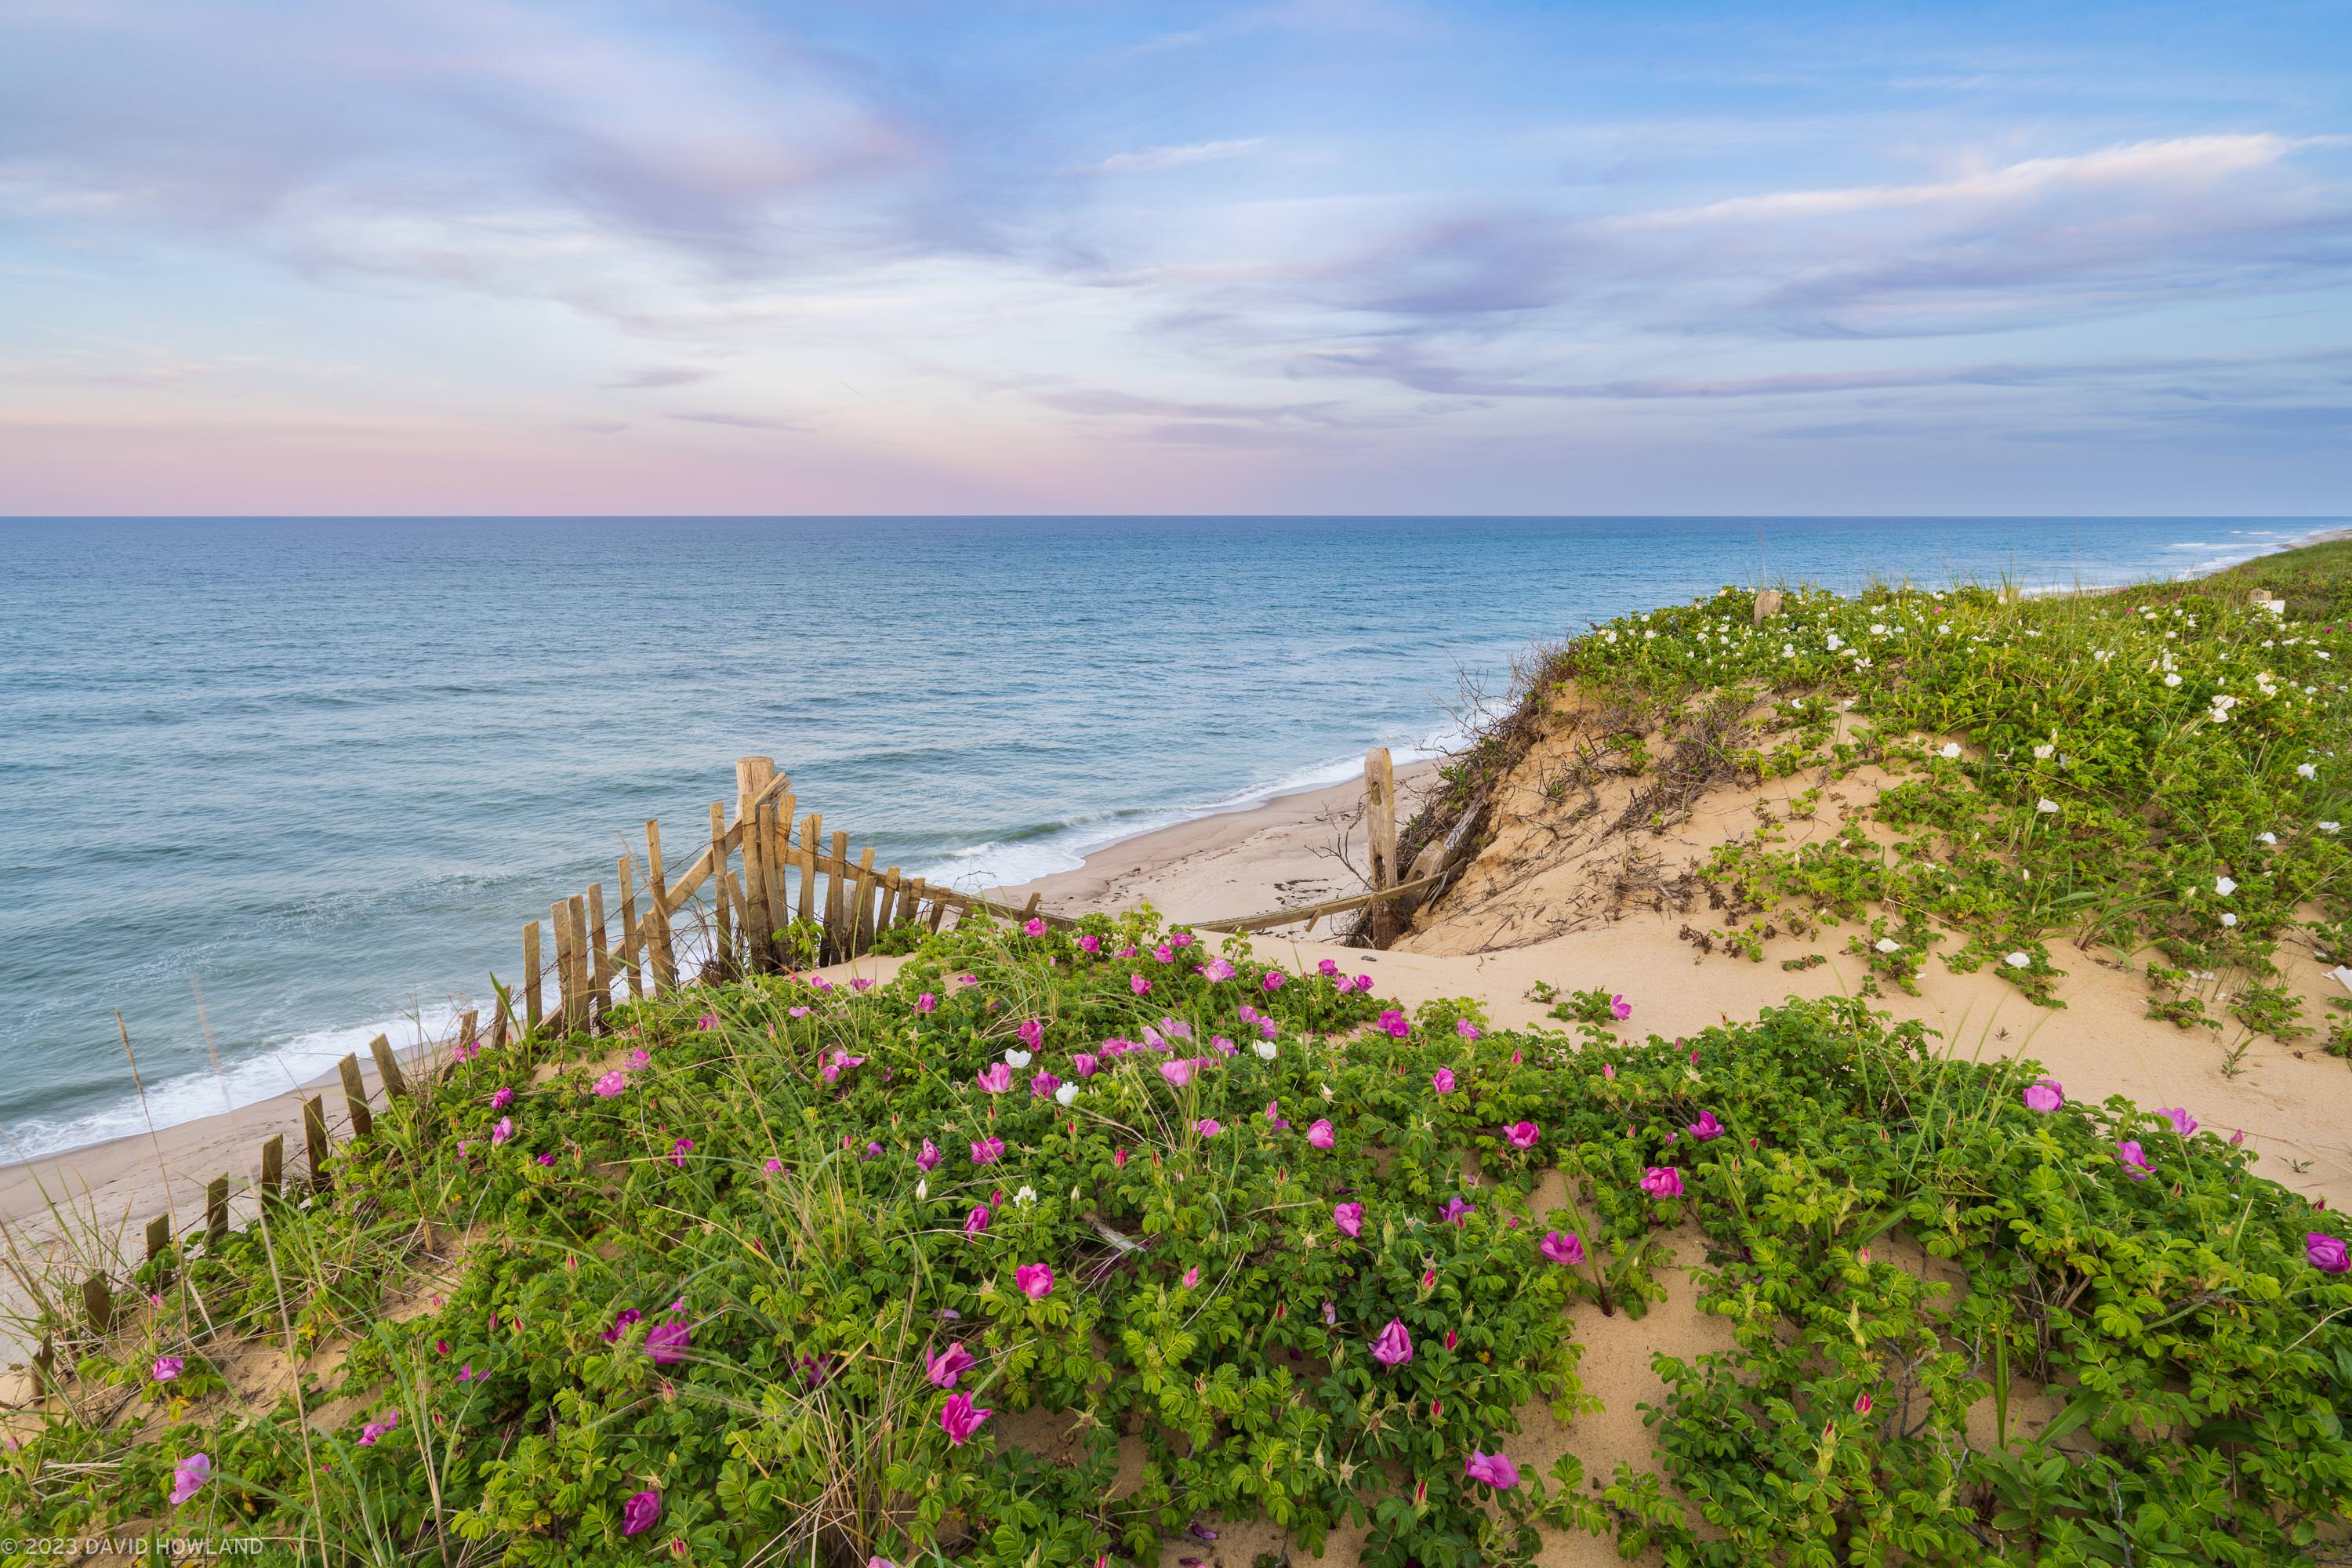 A photo of colorful pink and white rosa rugosa flowers blooming in the sand dunes above the Atlantic Ocean in the Cape Cod National Seashore.